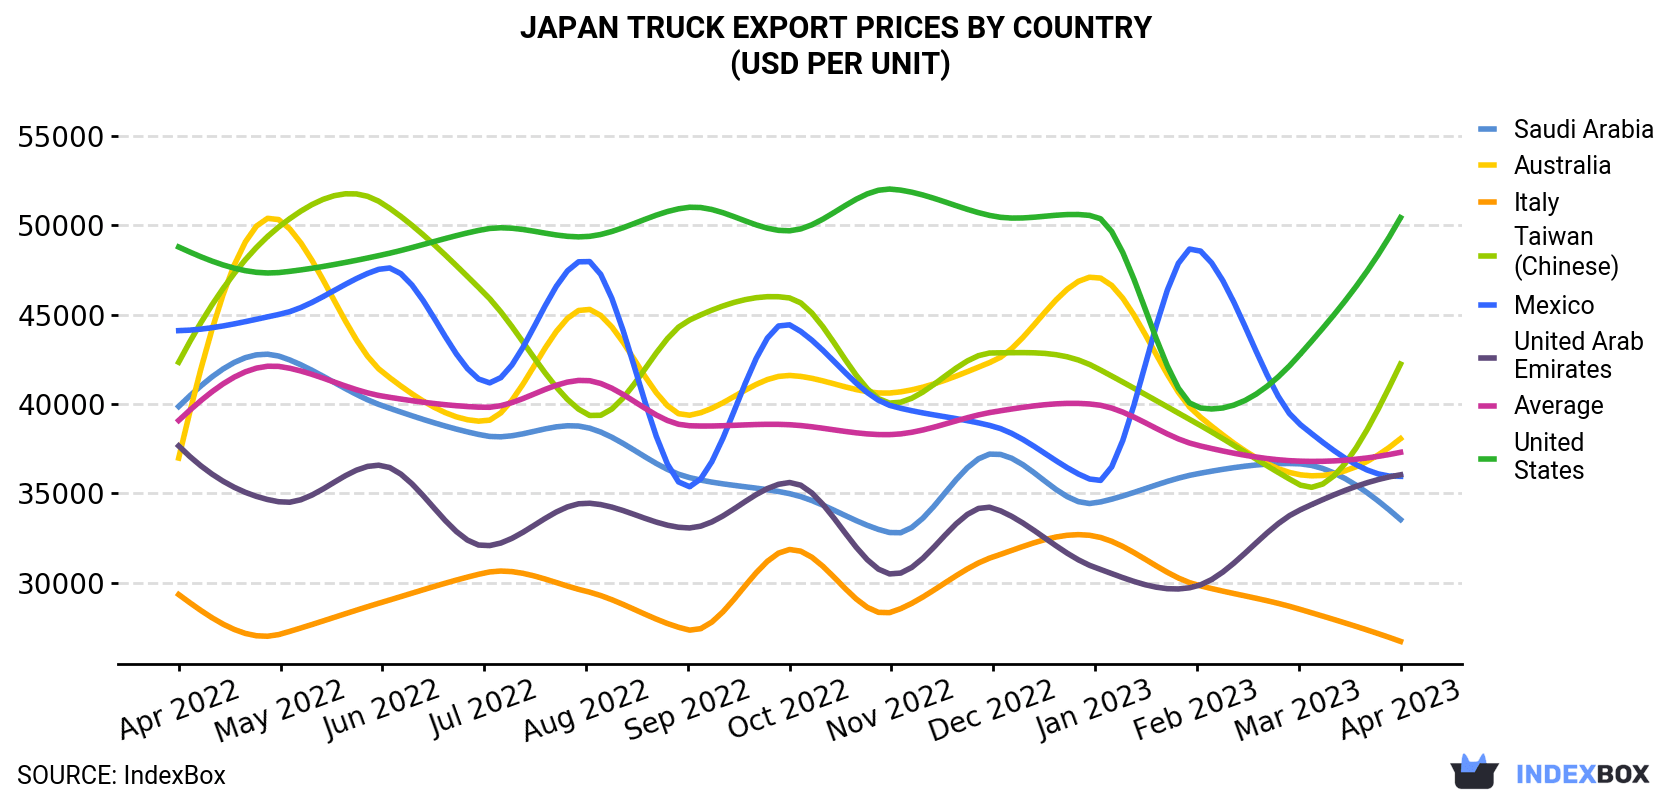 Japan Truck Export Prices By Country (USD Per Unit)